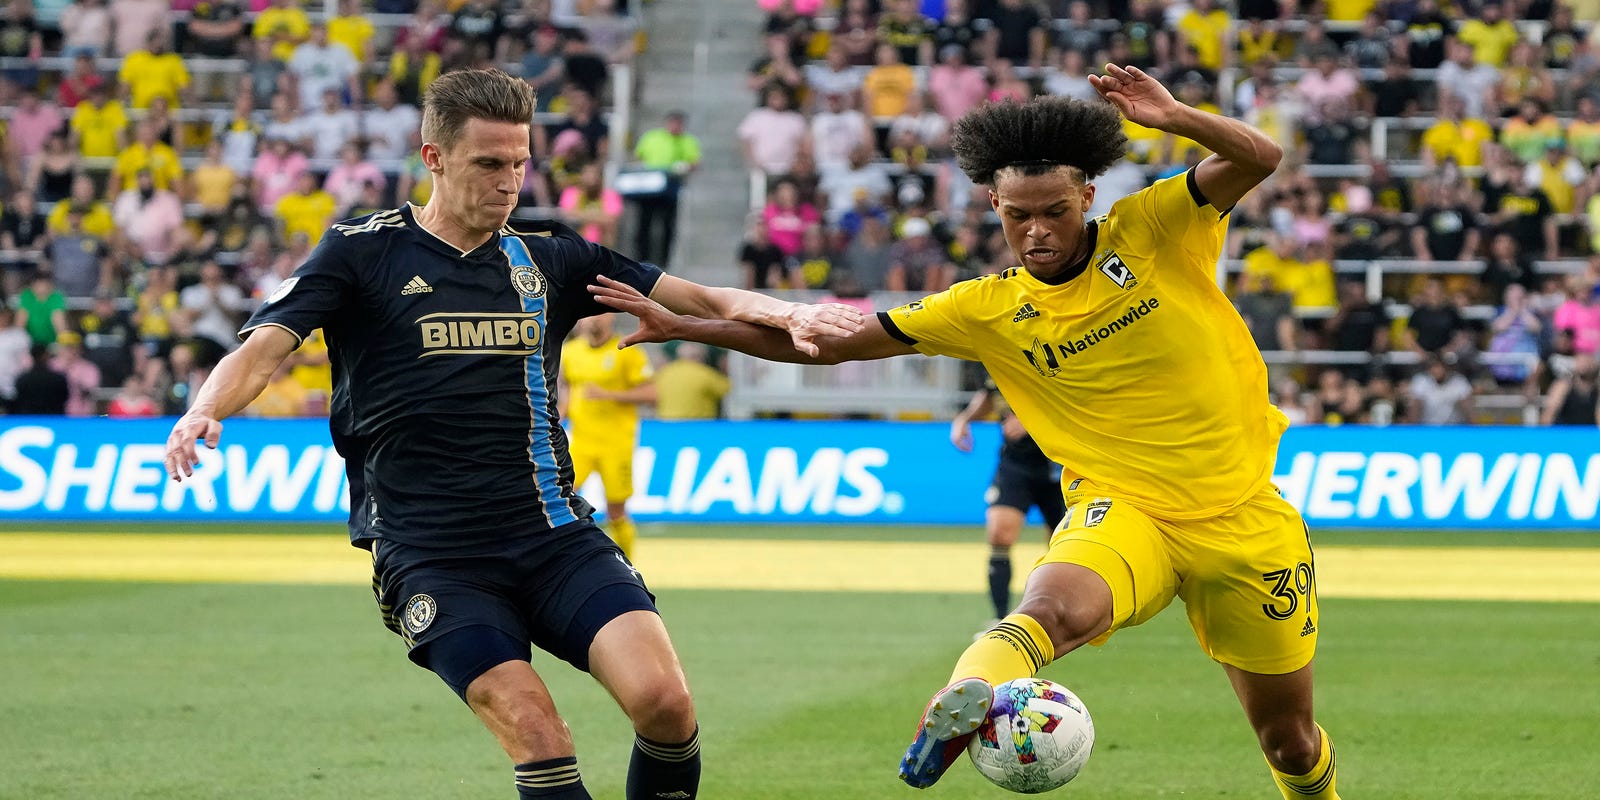 Crew 2 enter MLS Next Pro playoffs with 'extreme validation' from inaugural season success